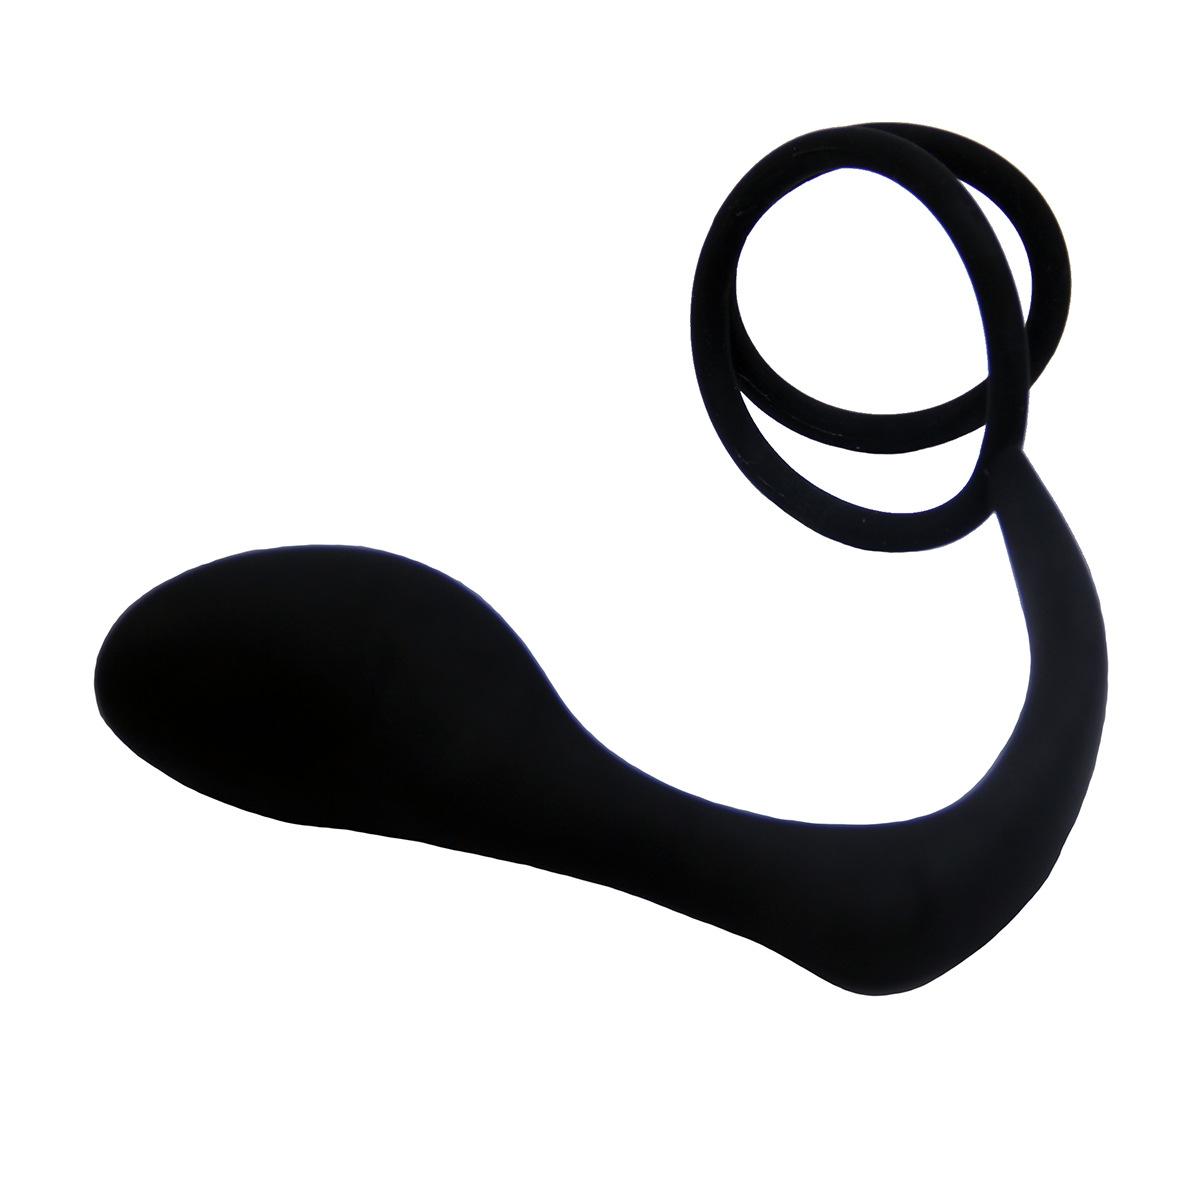 Orissi G-point Prostate Massager, male silicone anal plug